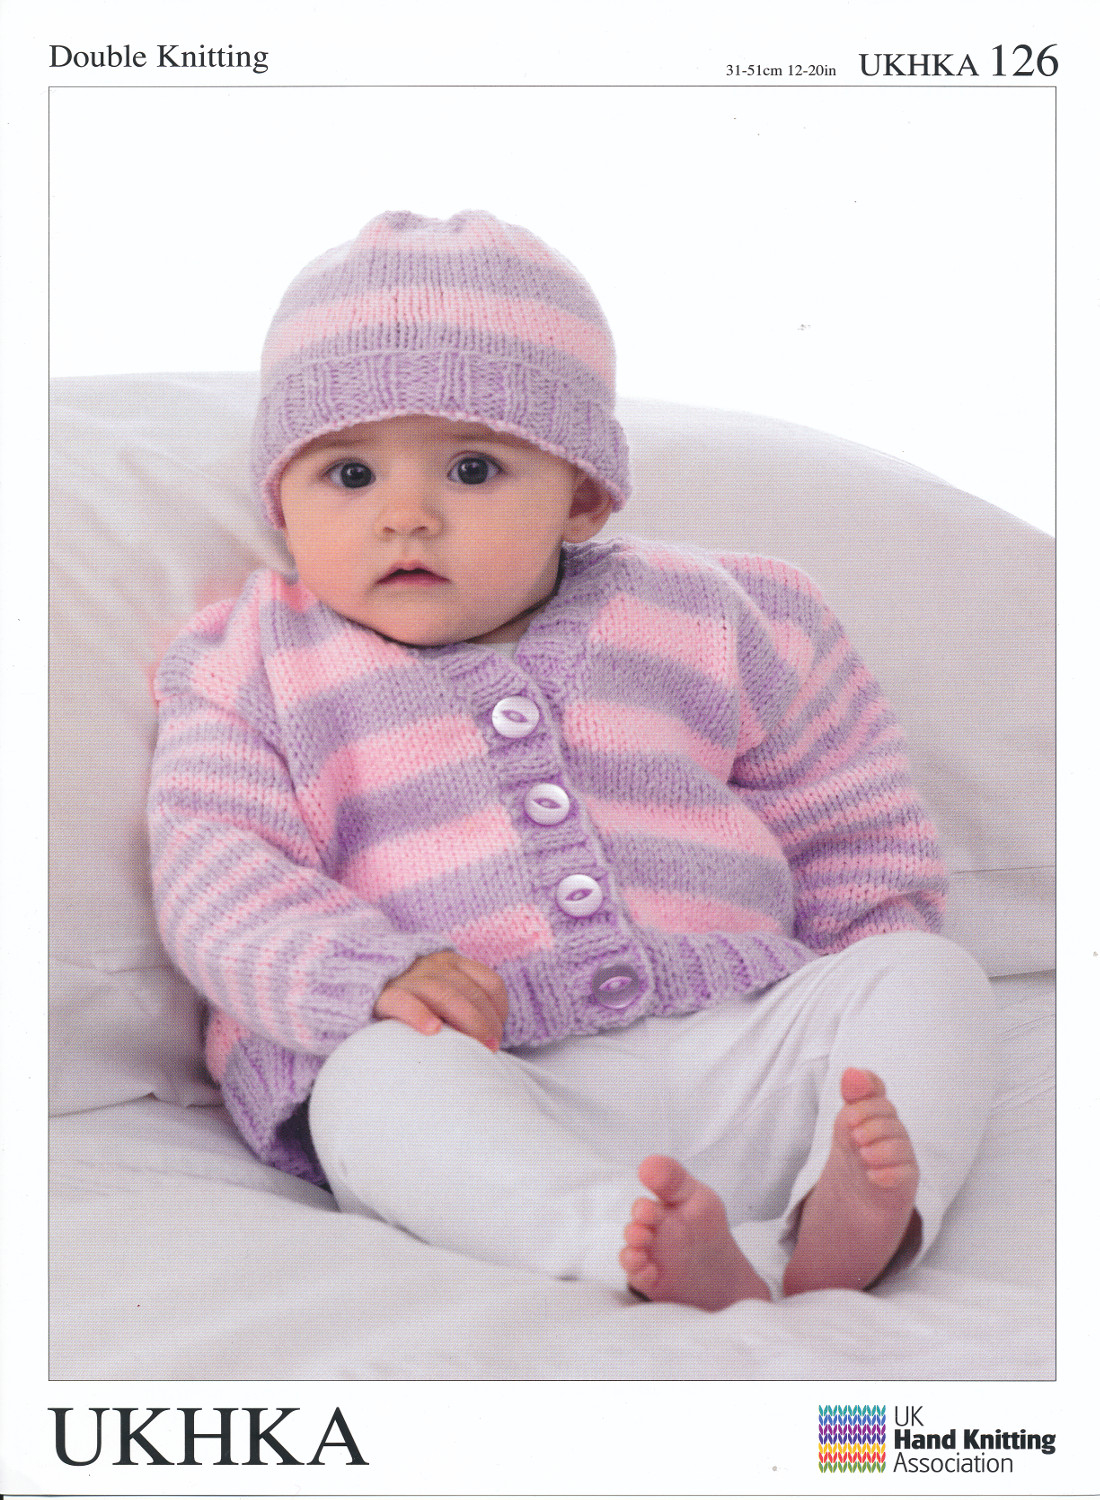 Free Double Knit Baby Cardigan Patterns Details About Double Knitting Dk Pattern Ba Long Sleeved Striped Cardigan Hat Ukhka 126